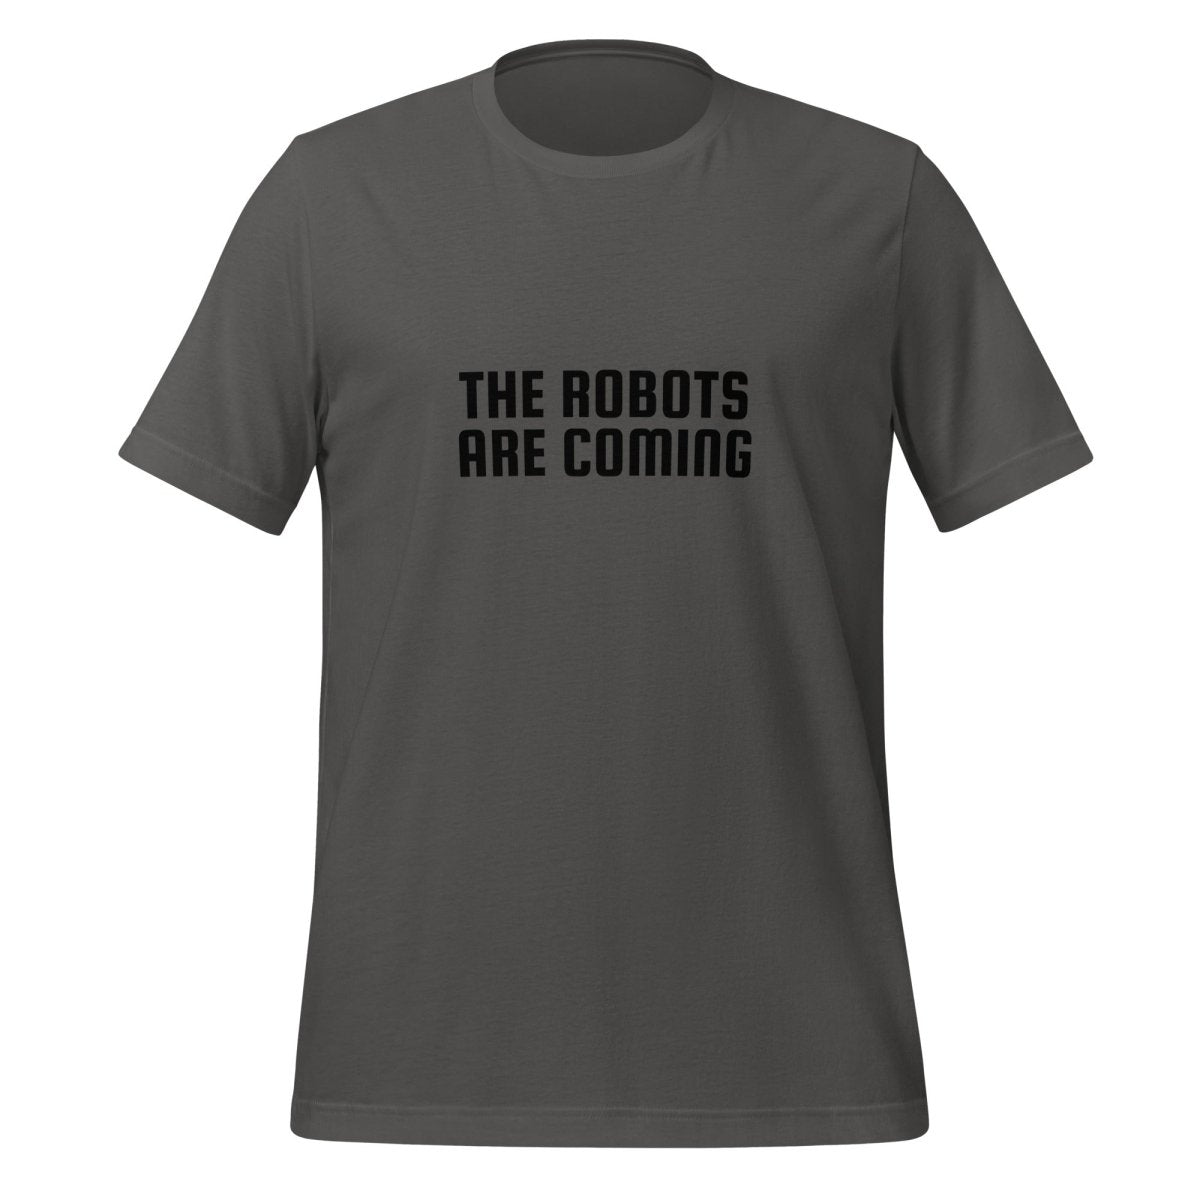 The Robots Are Coming in Black T - Shirt 2 (unisex) - Asphalt - AI Store